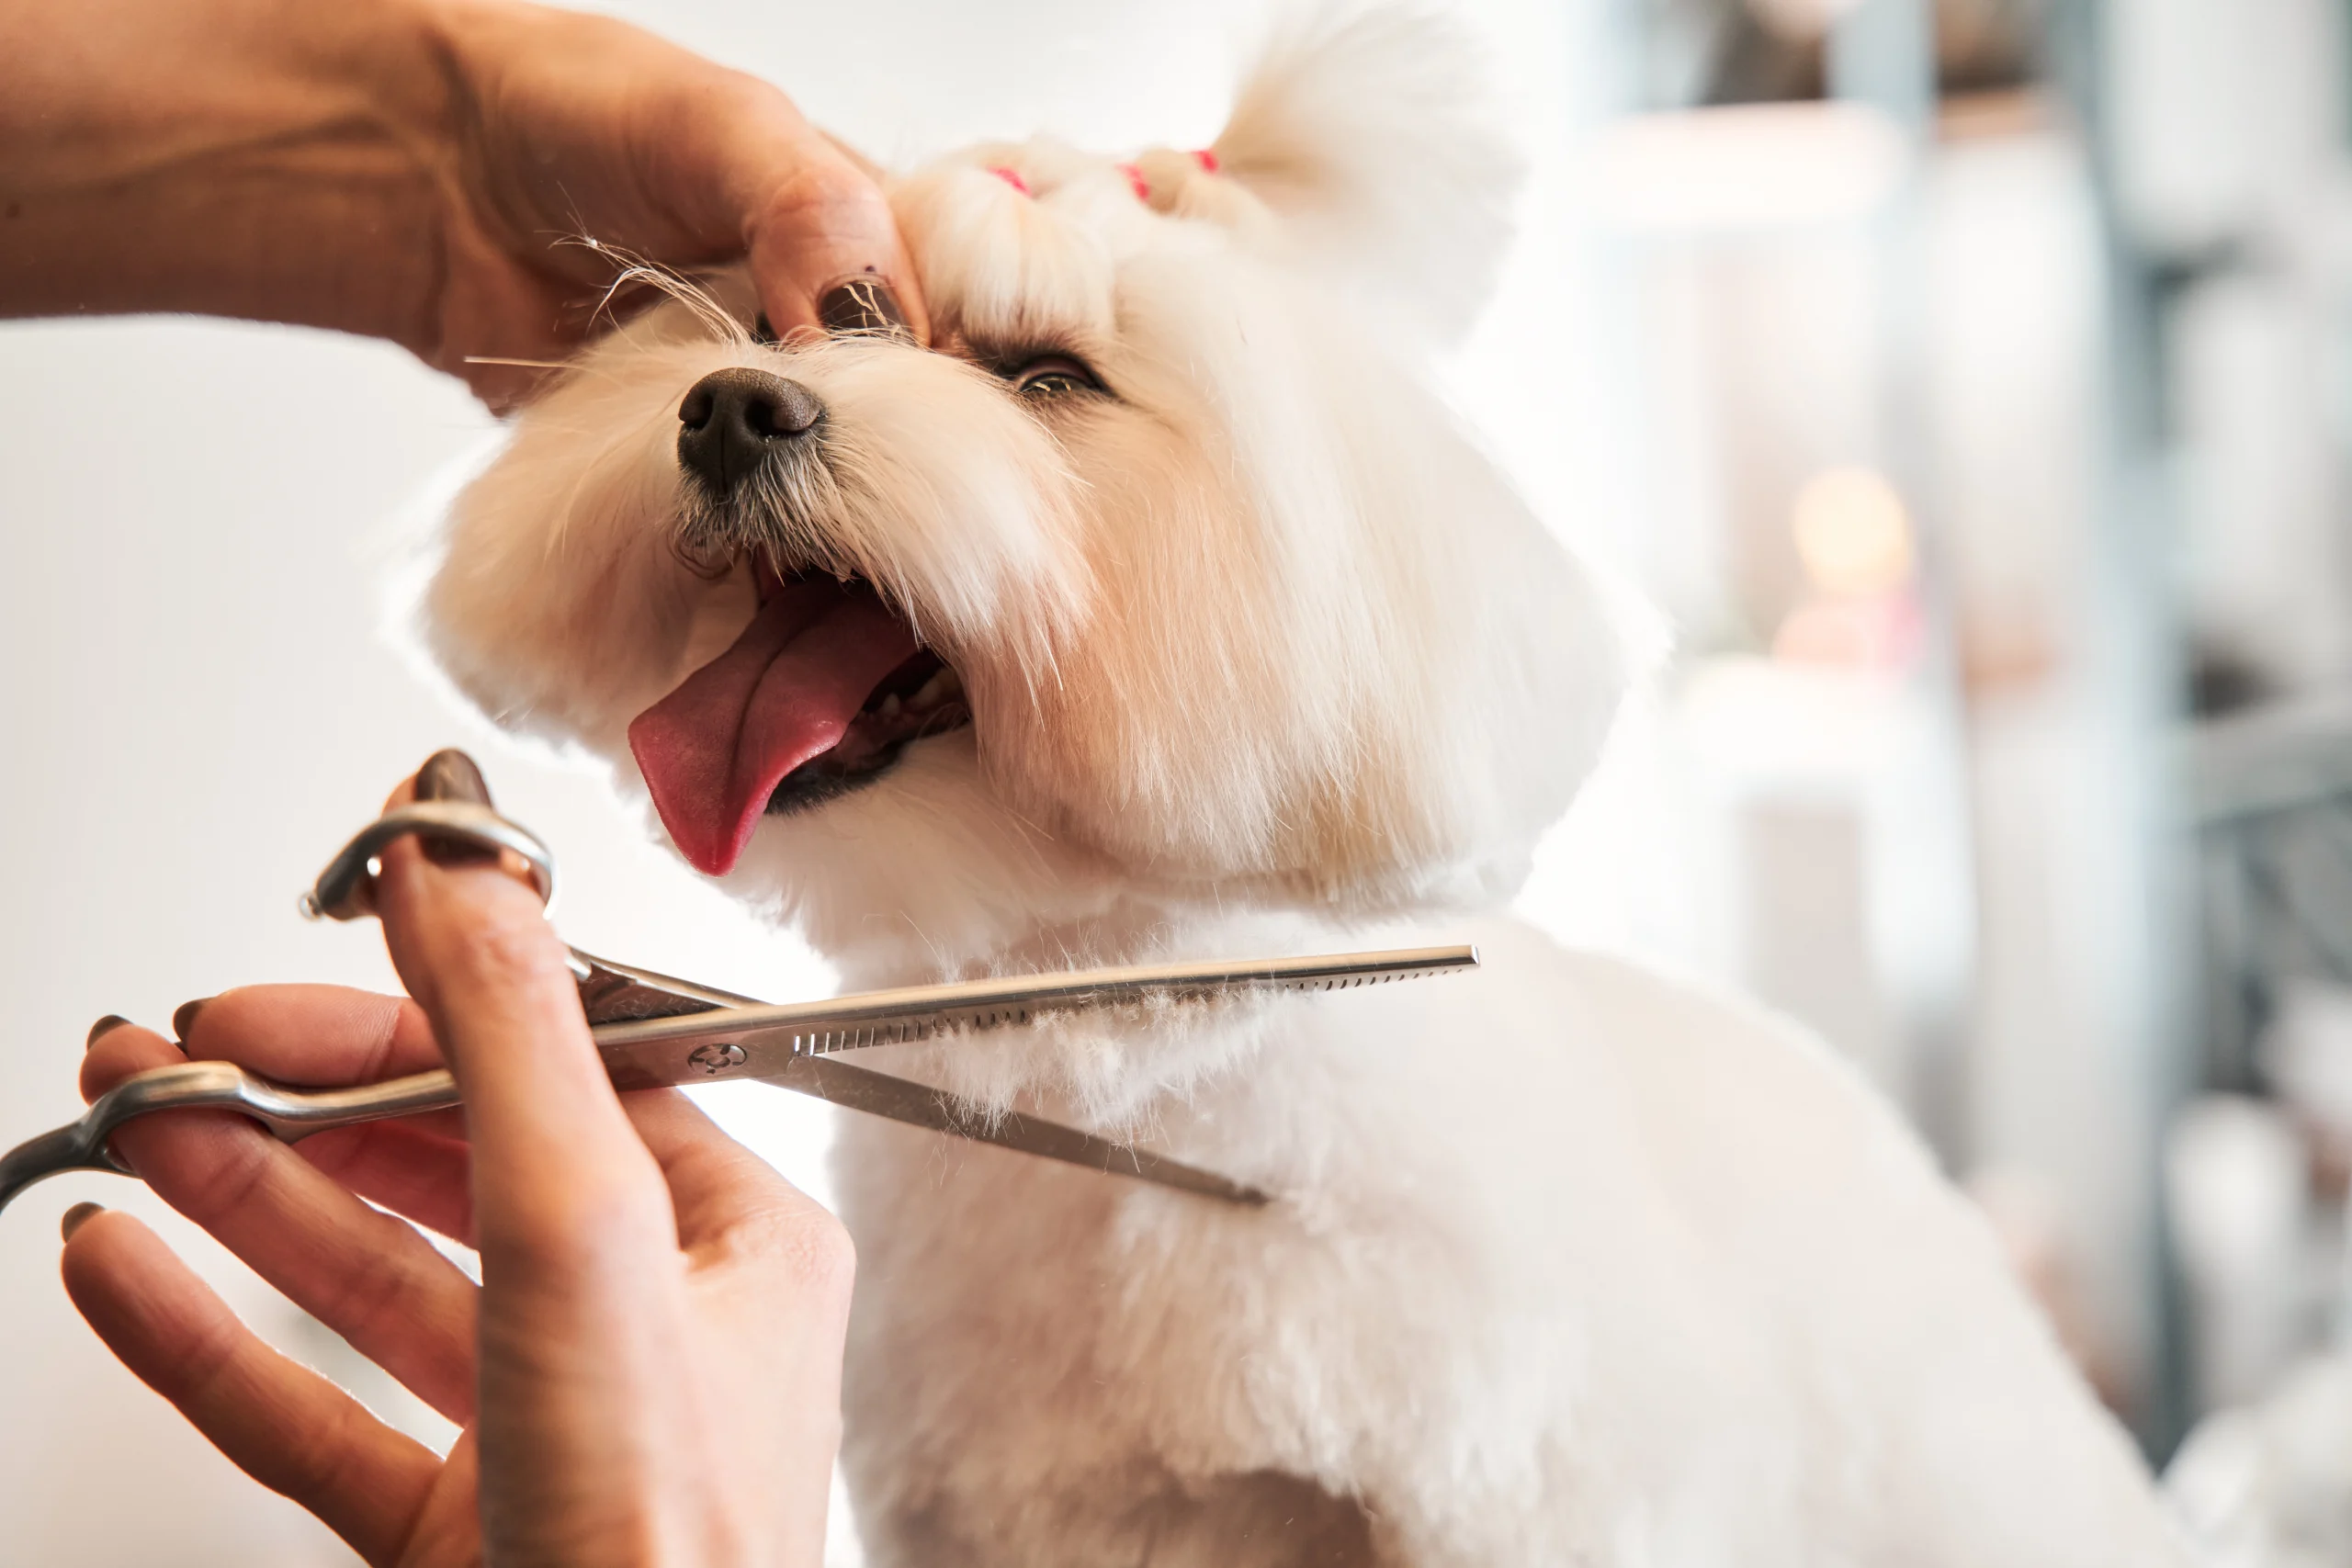 Model haircut of a dog's hair with special scissors view with muzzle close. White maltipoo at the grooming salon. The concept of popularizing grooming haircuts and caring for dogs